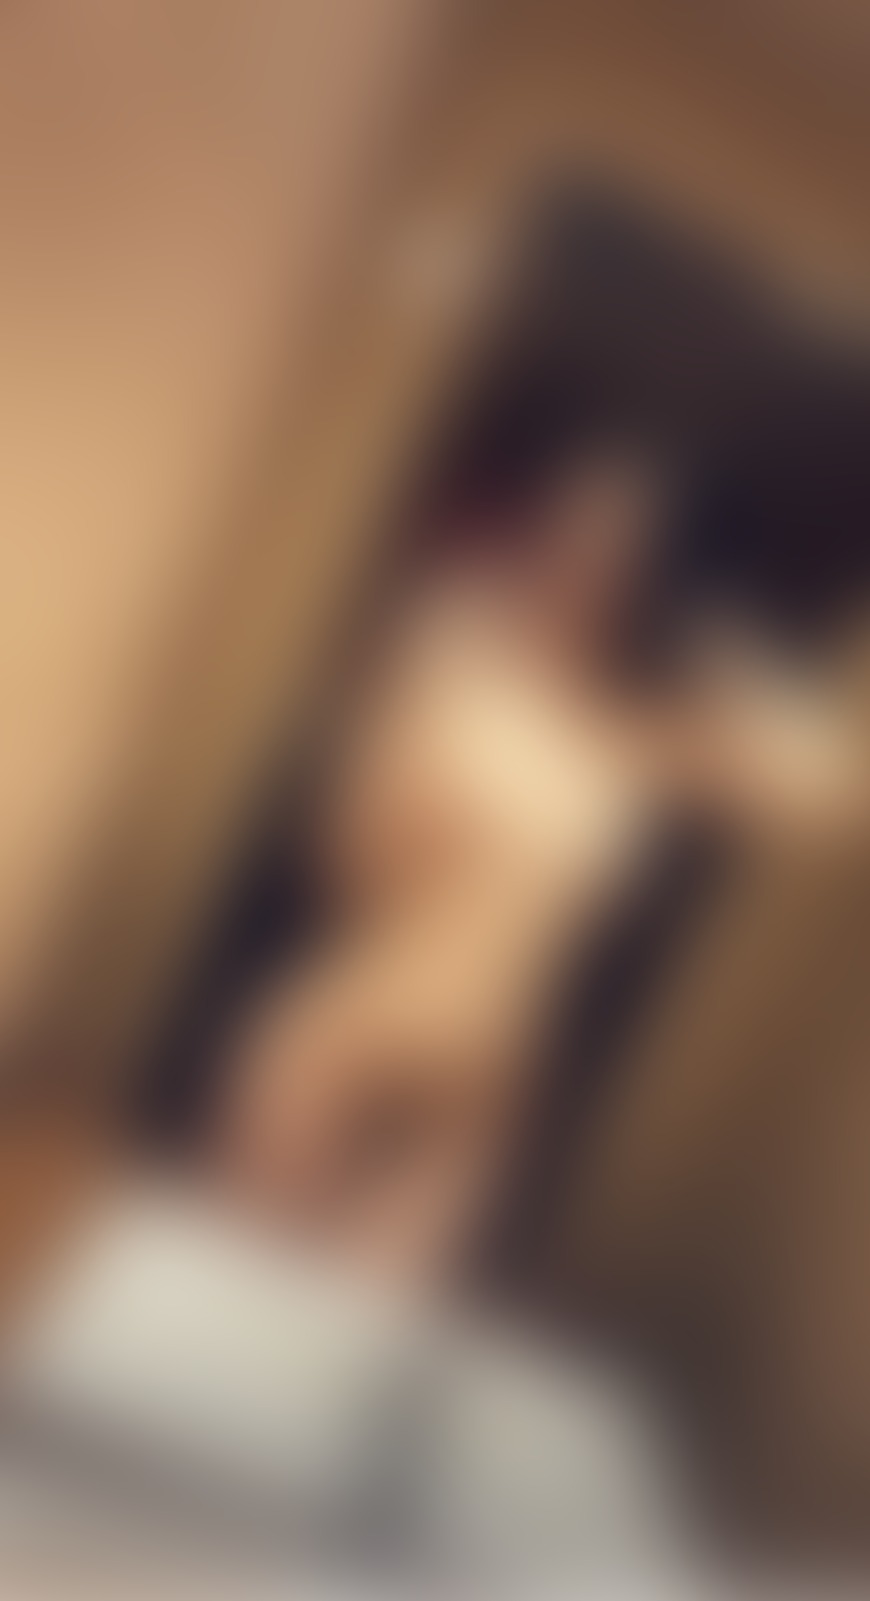 Stripped Down For You 💕 - post hidden image